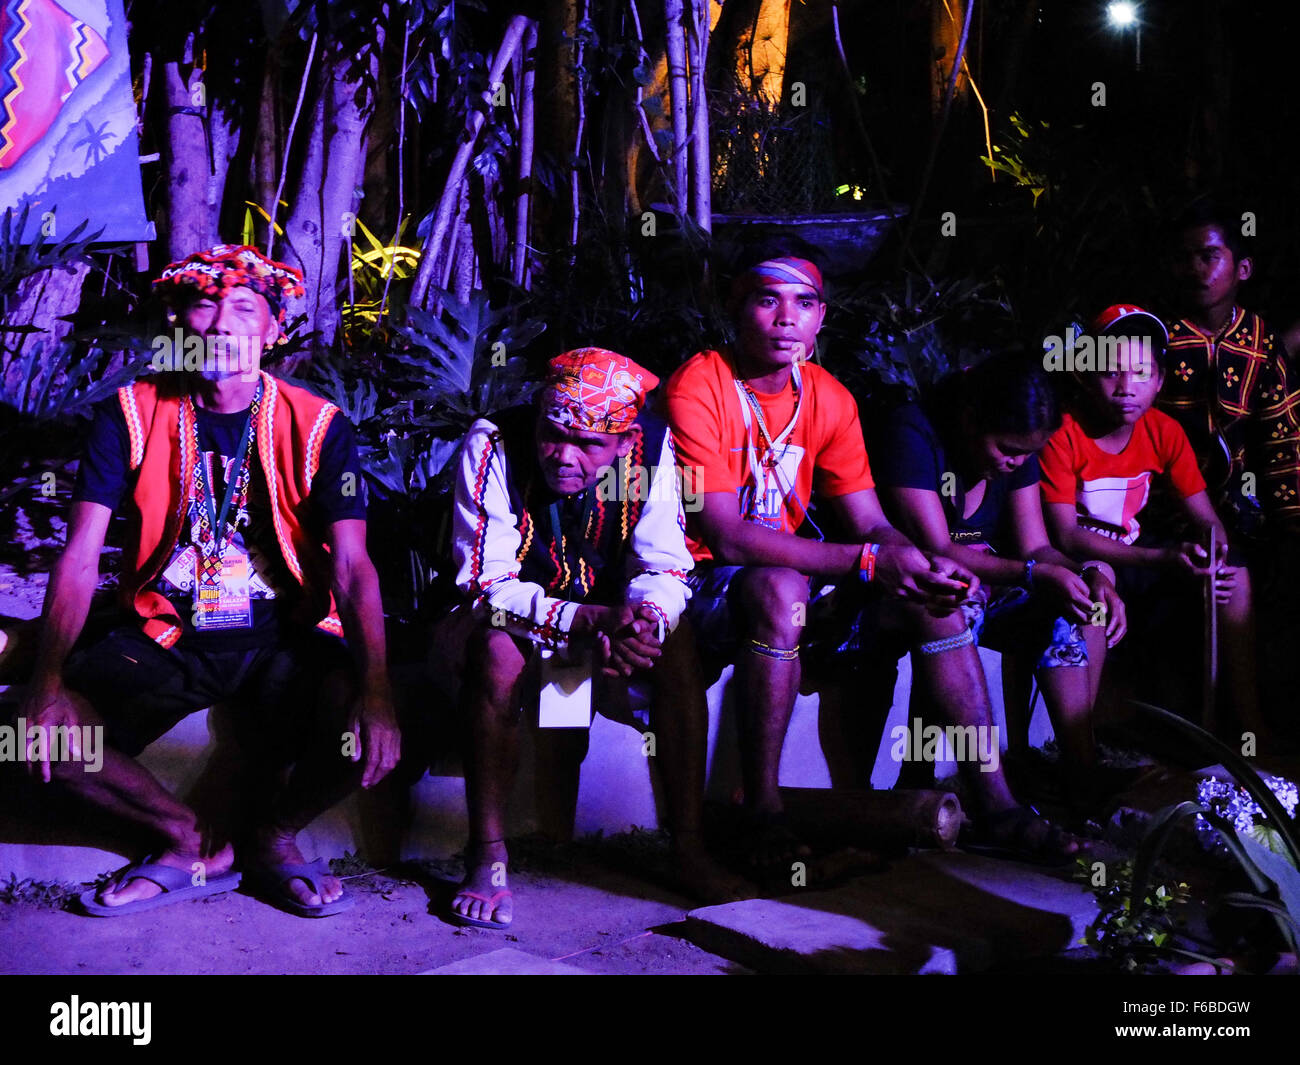 Lumad elder-lies, and youngsters joyfully watching the Solidarity Cultural Night Program. The Lumad peoples are a group of indigenous people of the southern Philippines. It is a Cebuano term meaning 'native' or 'indigenous'. The term is short for Katawhang Lumad (literally 'indigenous peoples'), the autonym officially adopted by the delegates of the Lumad Mindanao Peoples Federation (LMPF) founding assembly on 26 June 1986 at the Guadalupe Formation Center, Balindog, Kidapawan, Cotabato, Philippines. It is the self-ascription and collective identity of the indigenous peoples of Mindanao. (Phot Stock Photo